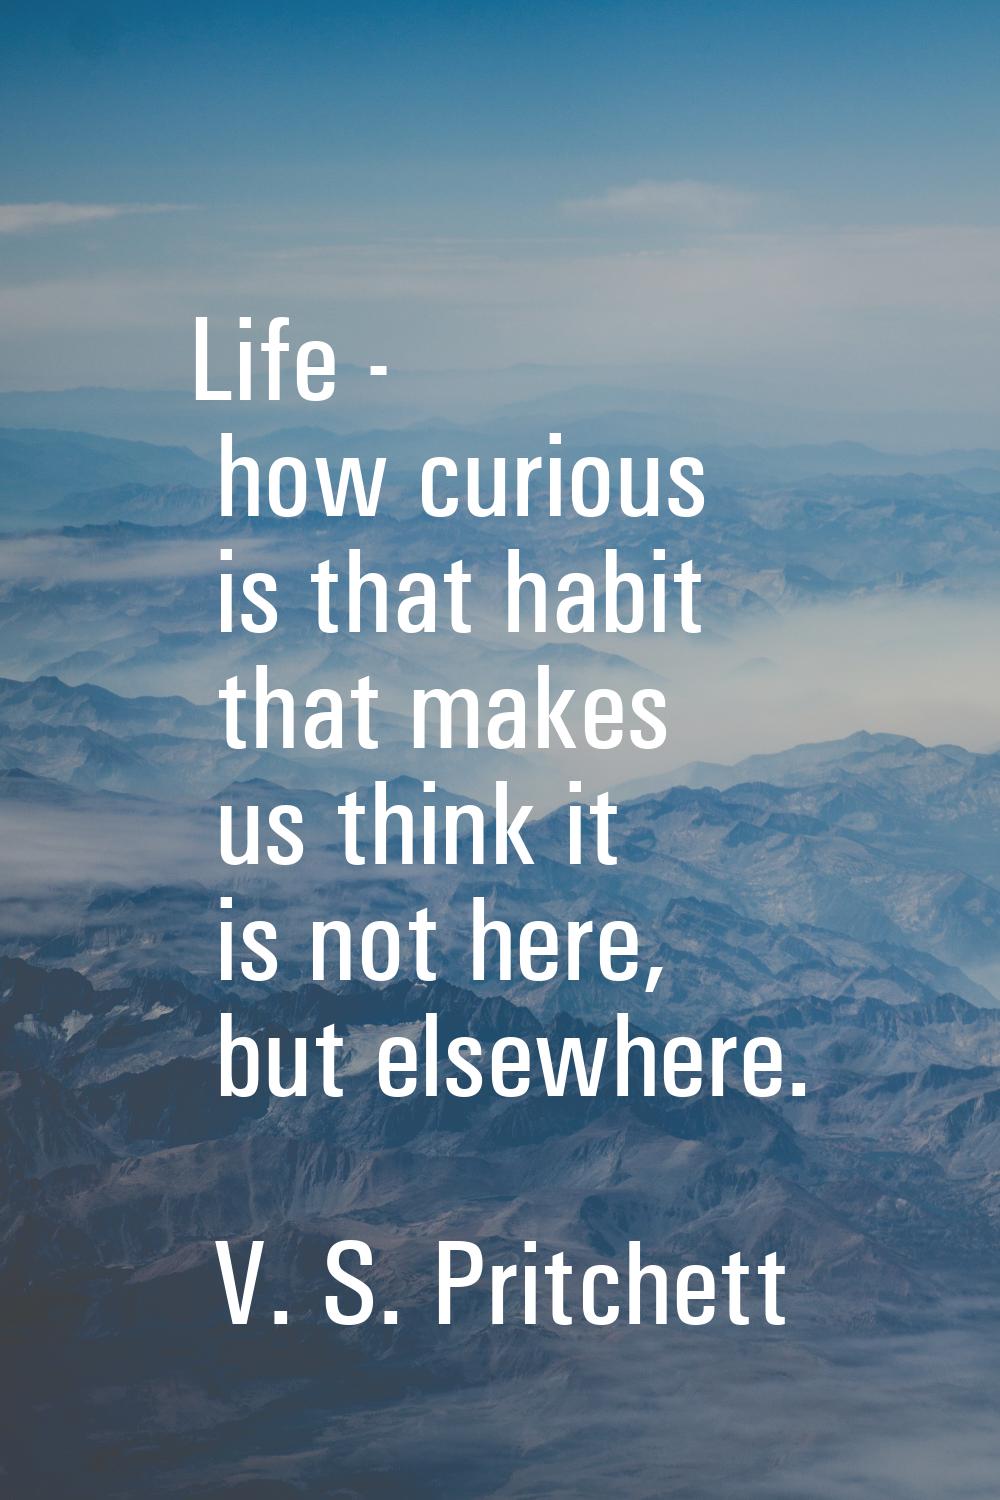 Life - how curious is that habit that makes us think it is not here, but elsewhere.